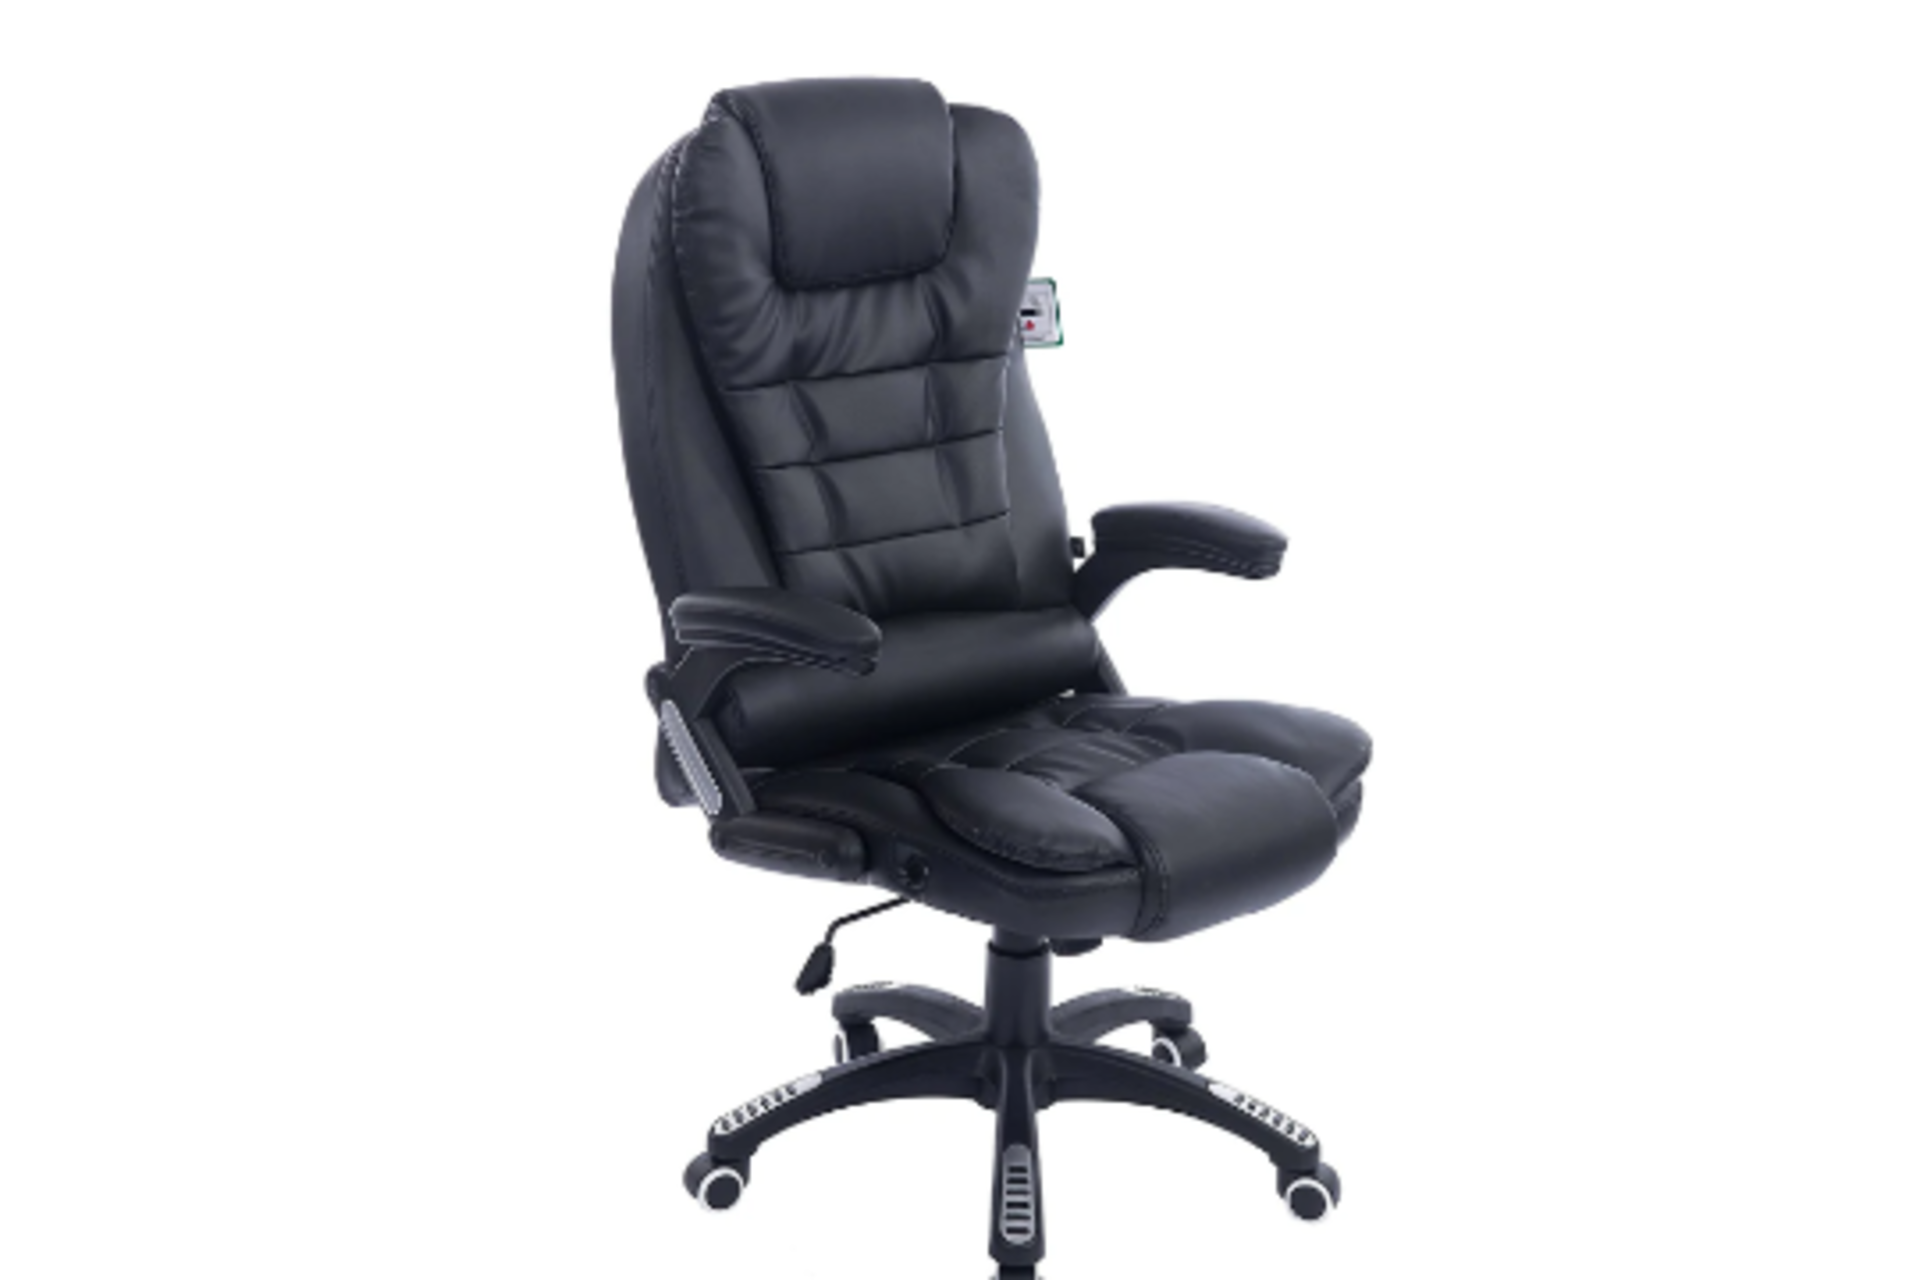 Executive Recline High Back Extra Padded Office Chair, MO17 Black. RRP £189.99. - SR4. Chair back